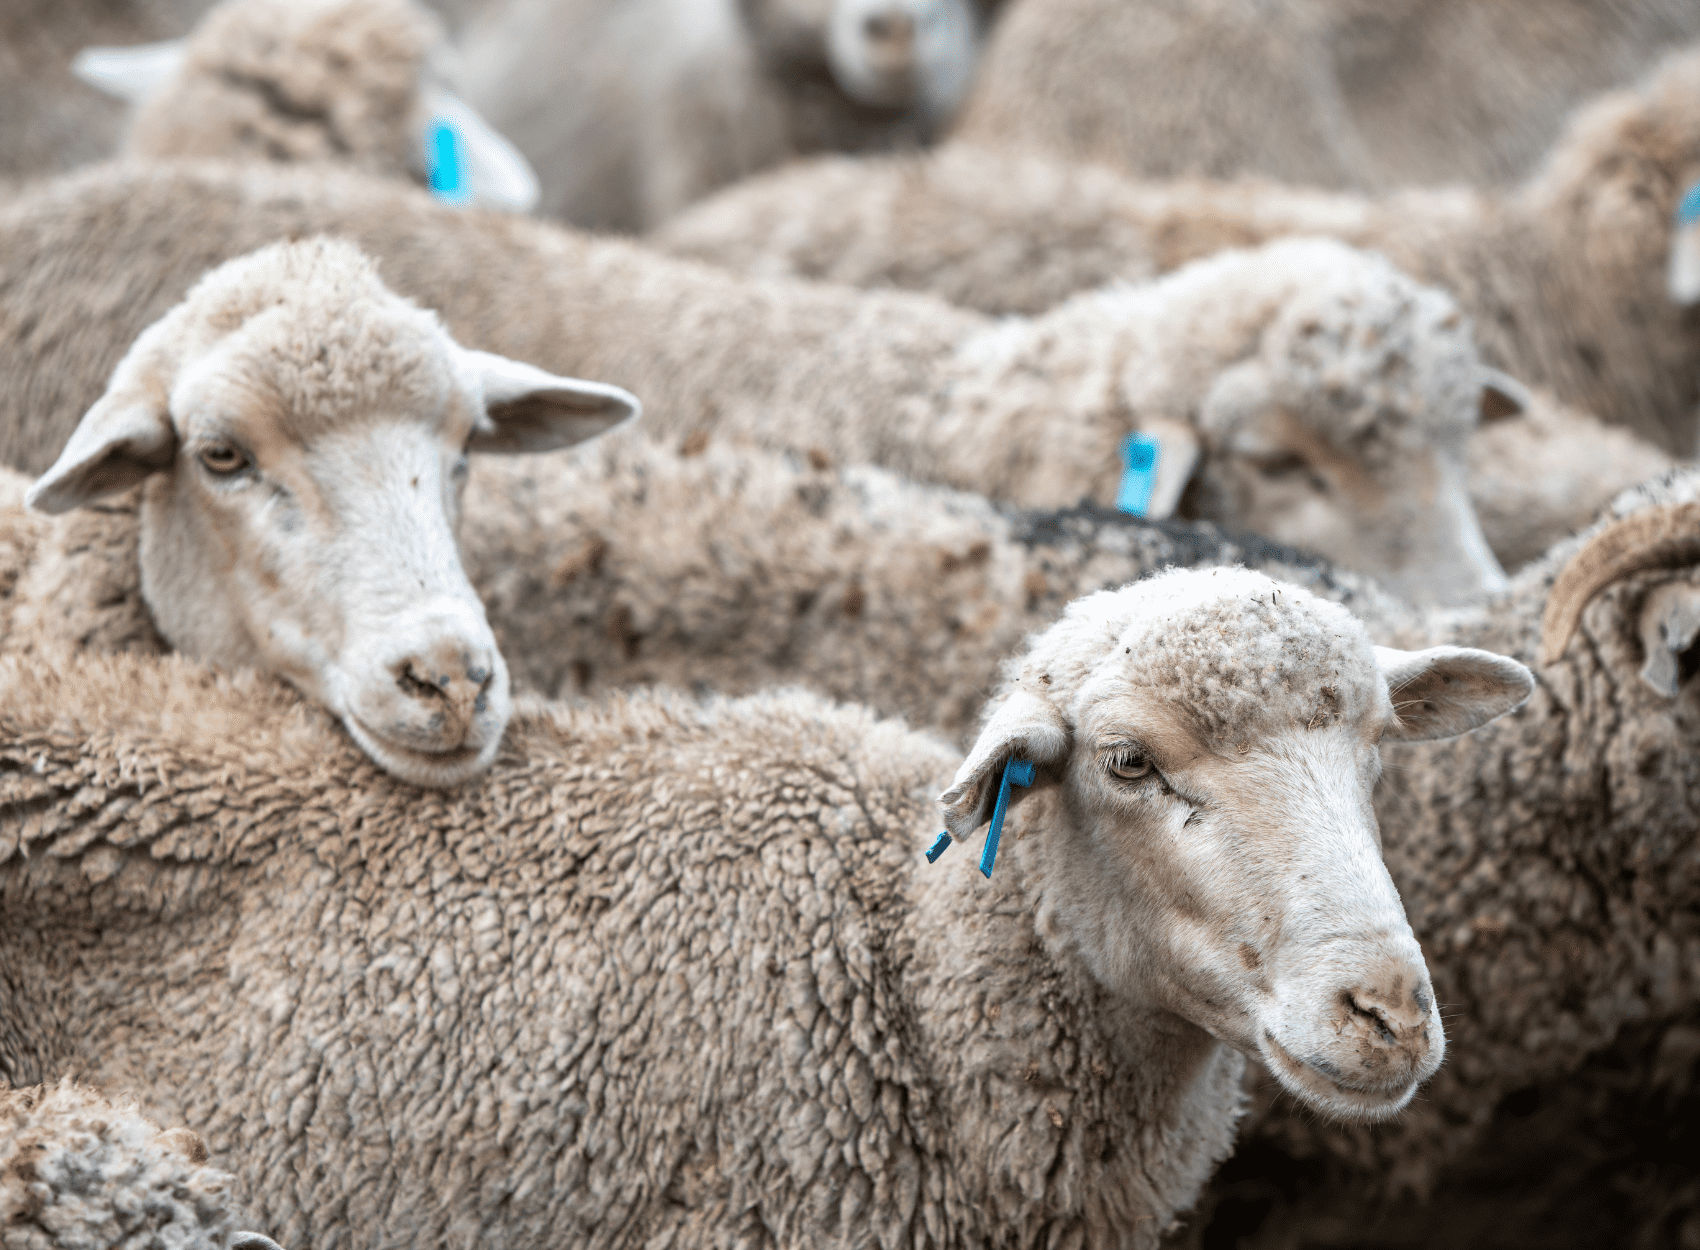 Sheeps wool as a natural building material and insulator